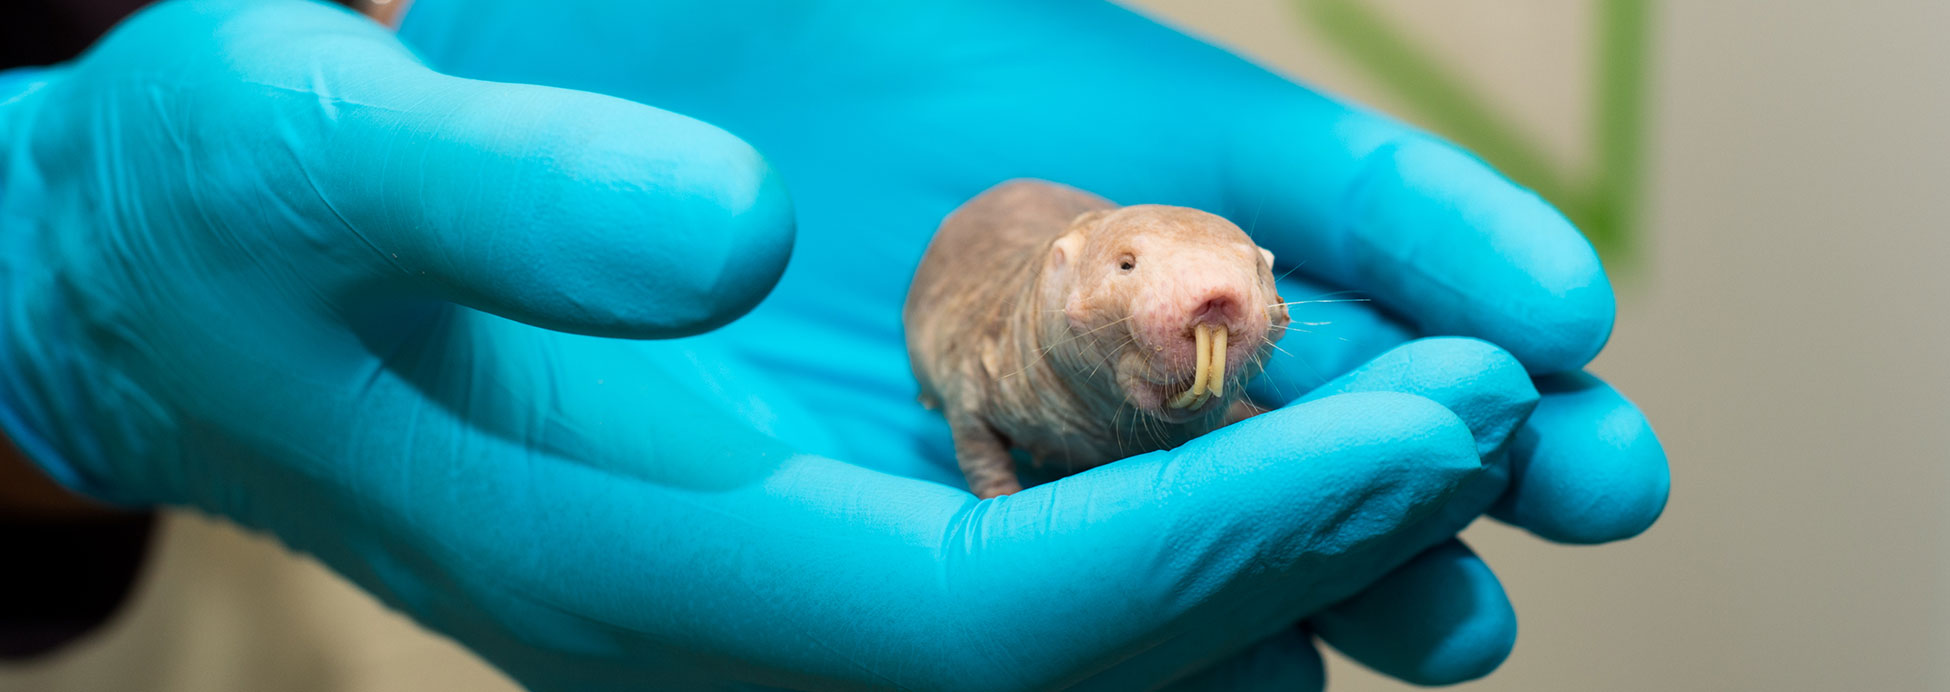 Research: Naked mole rats may hold secret to longevity